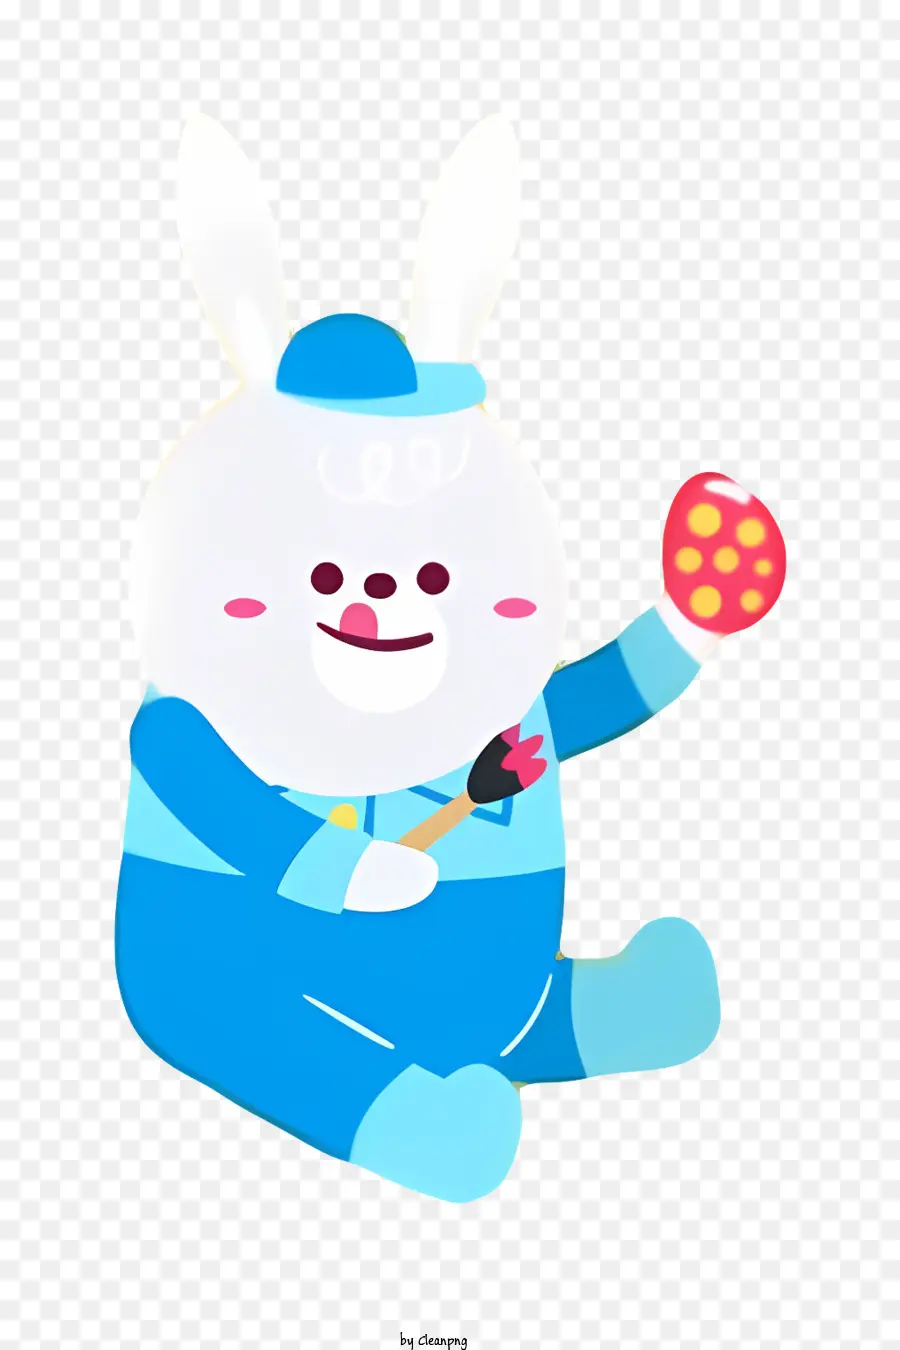 bunny face cartoon character blue clothes red gloves smiling face